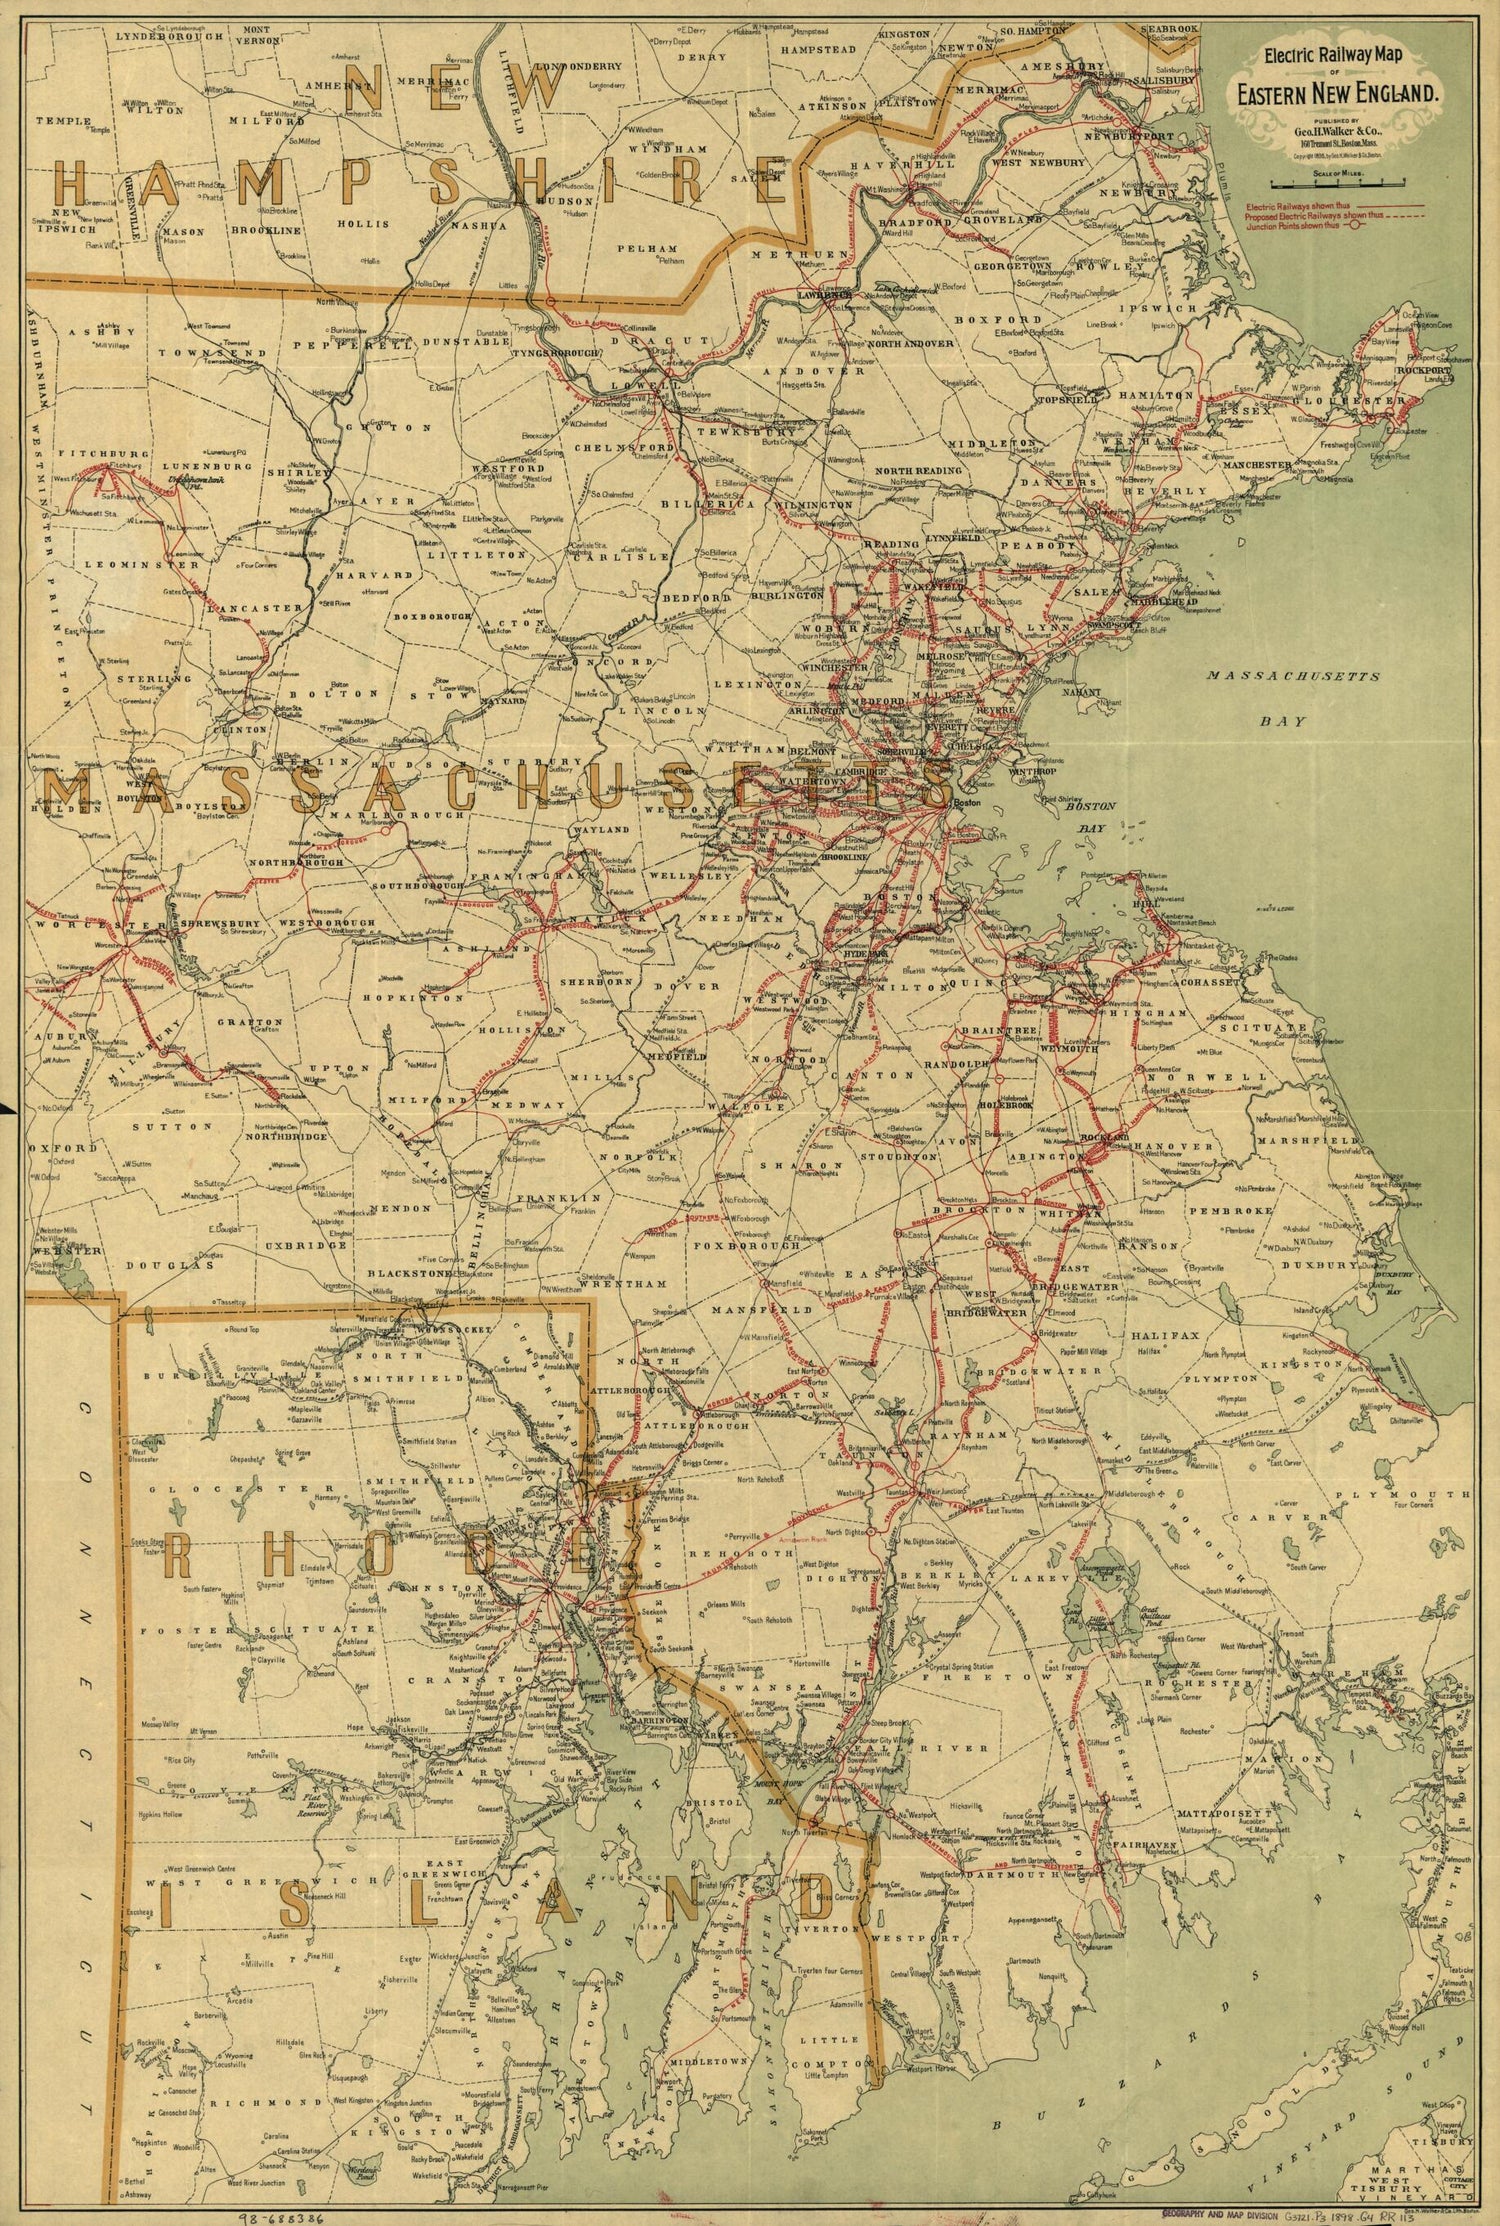 This old map of Electric Railway Map of Eastern New England from 1898 was created by  Geo. H. Walker &amp; Co in 1898